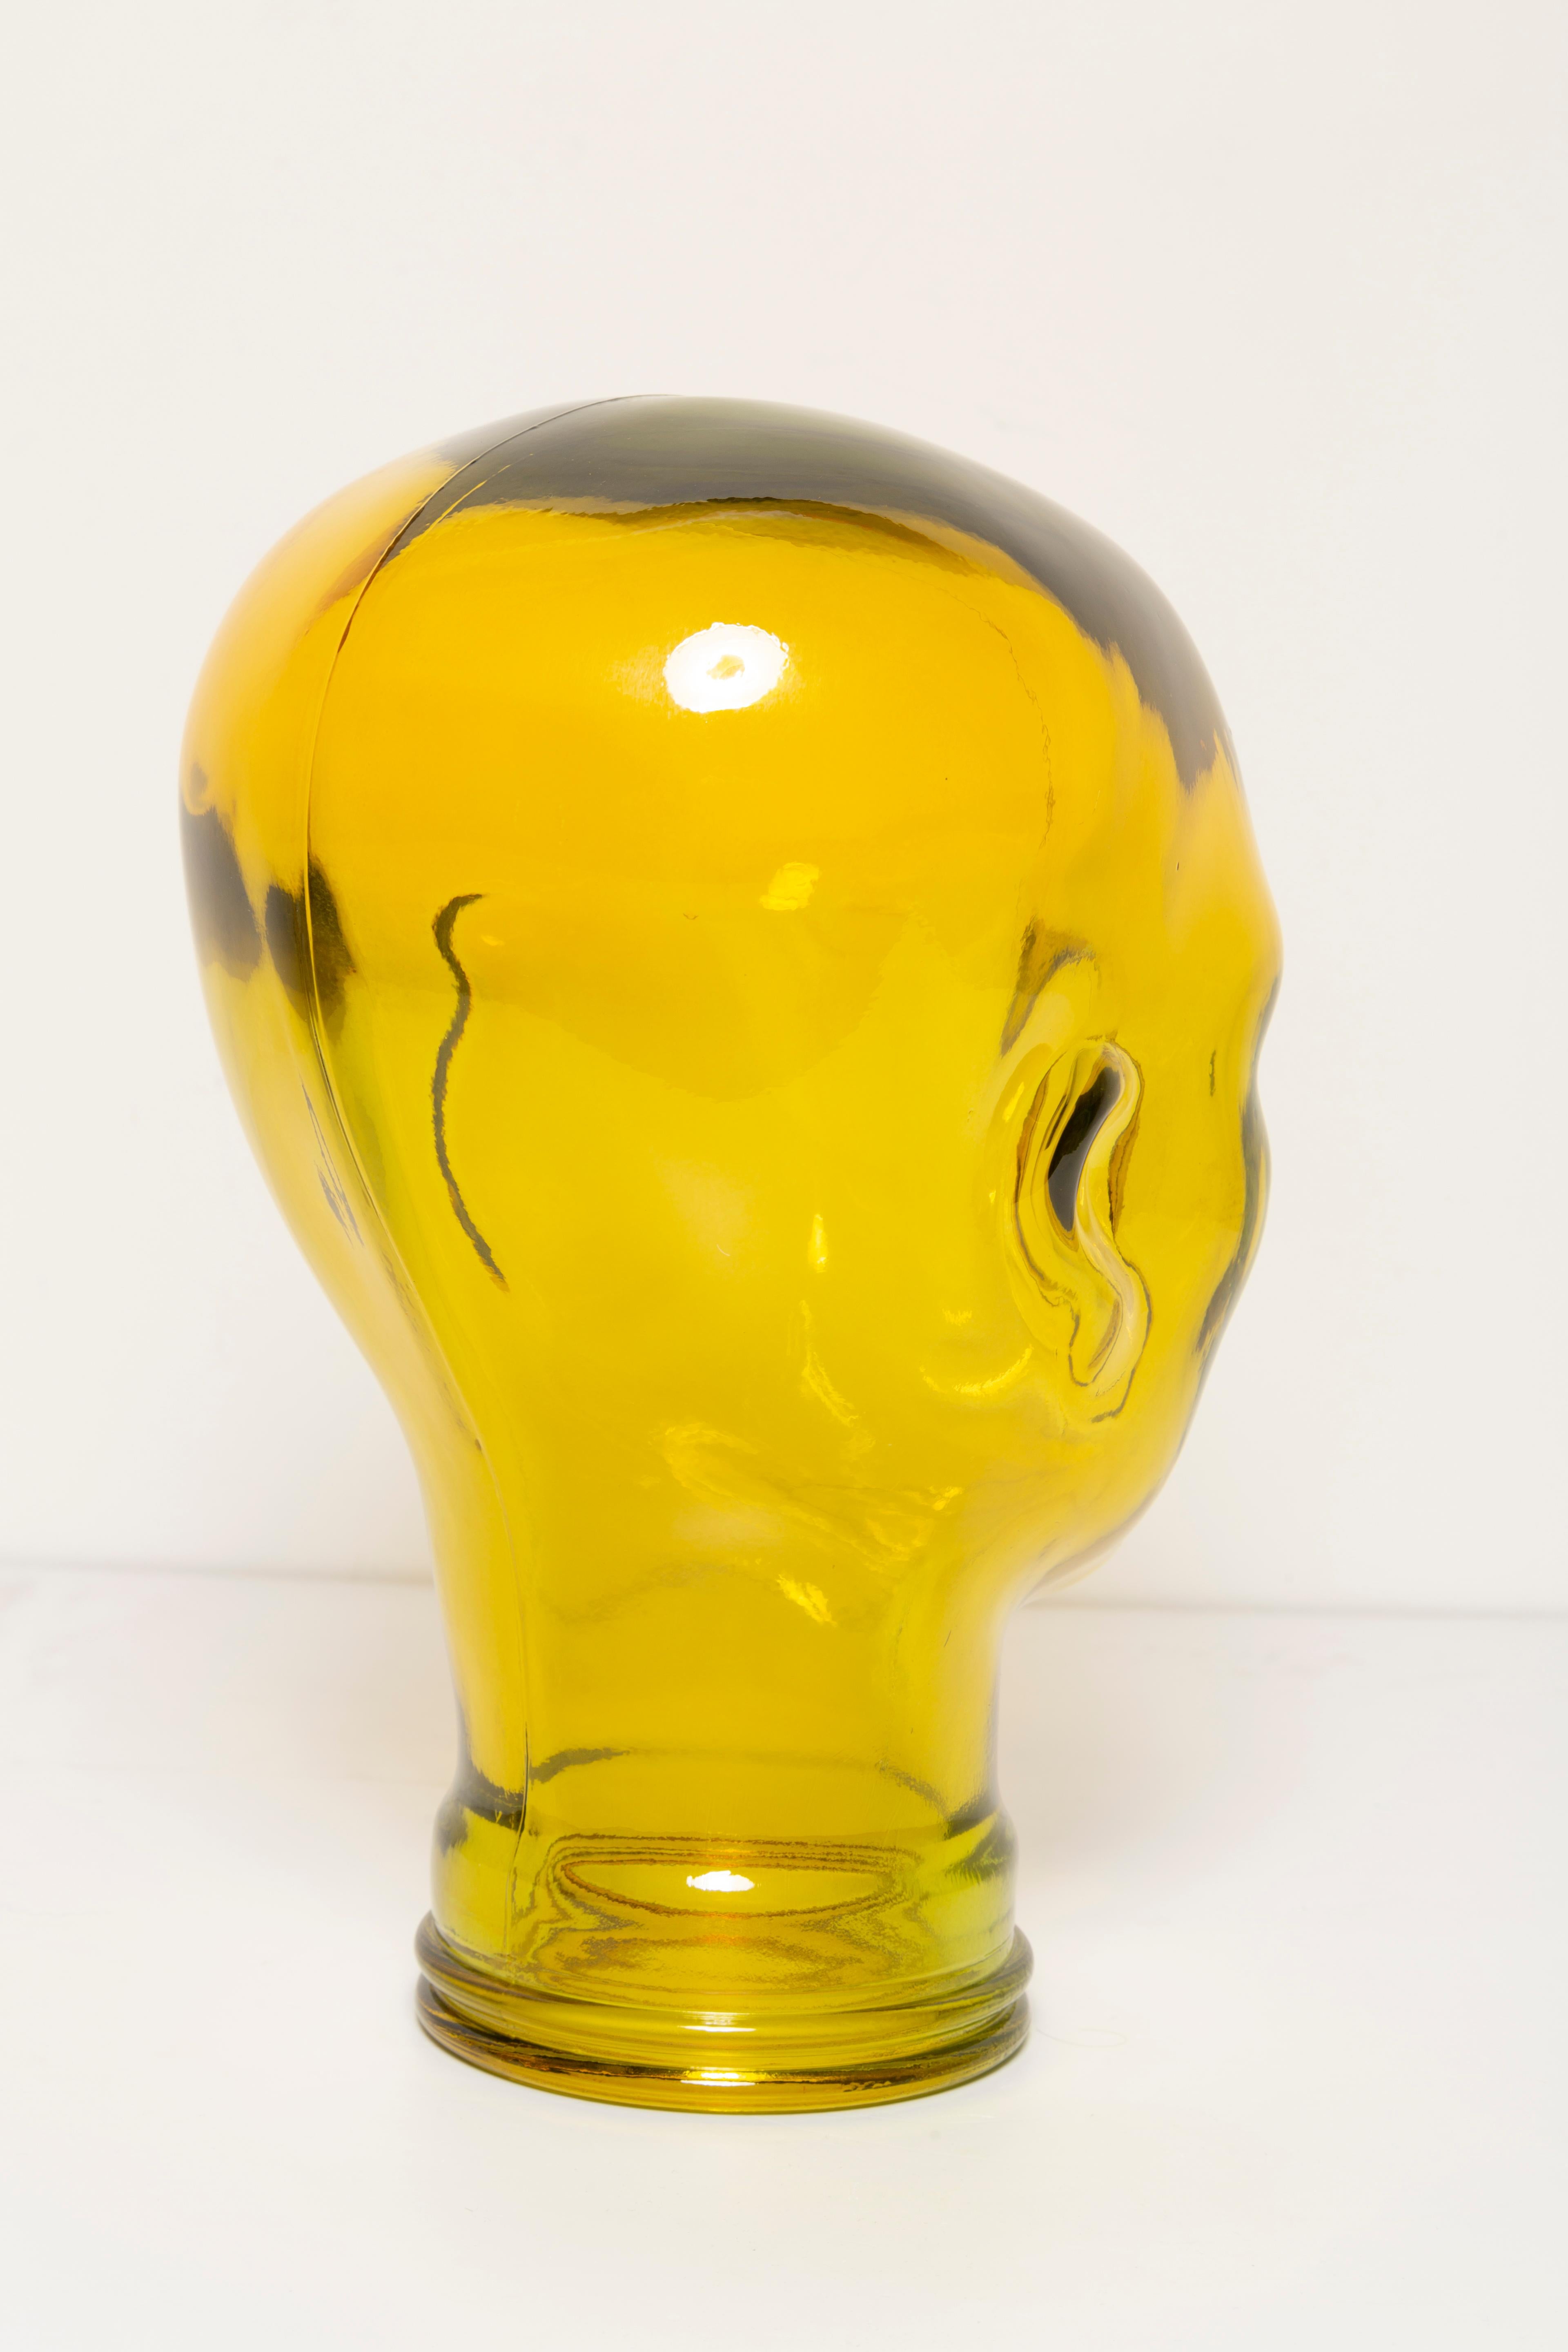 Yellow Vintage Decorative Mannequin Glass Head Sculpture, 1970s, Germany For Sale 2